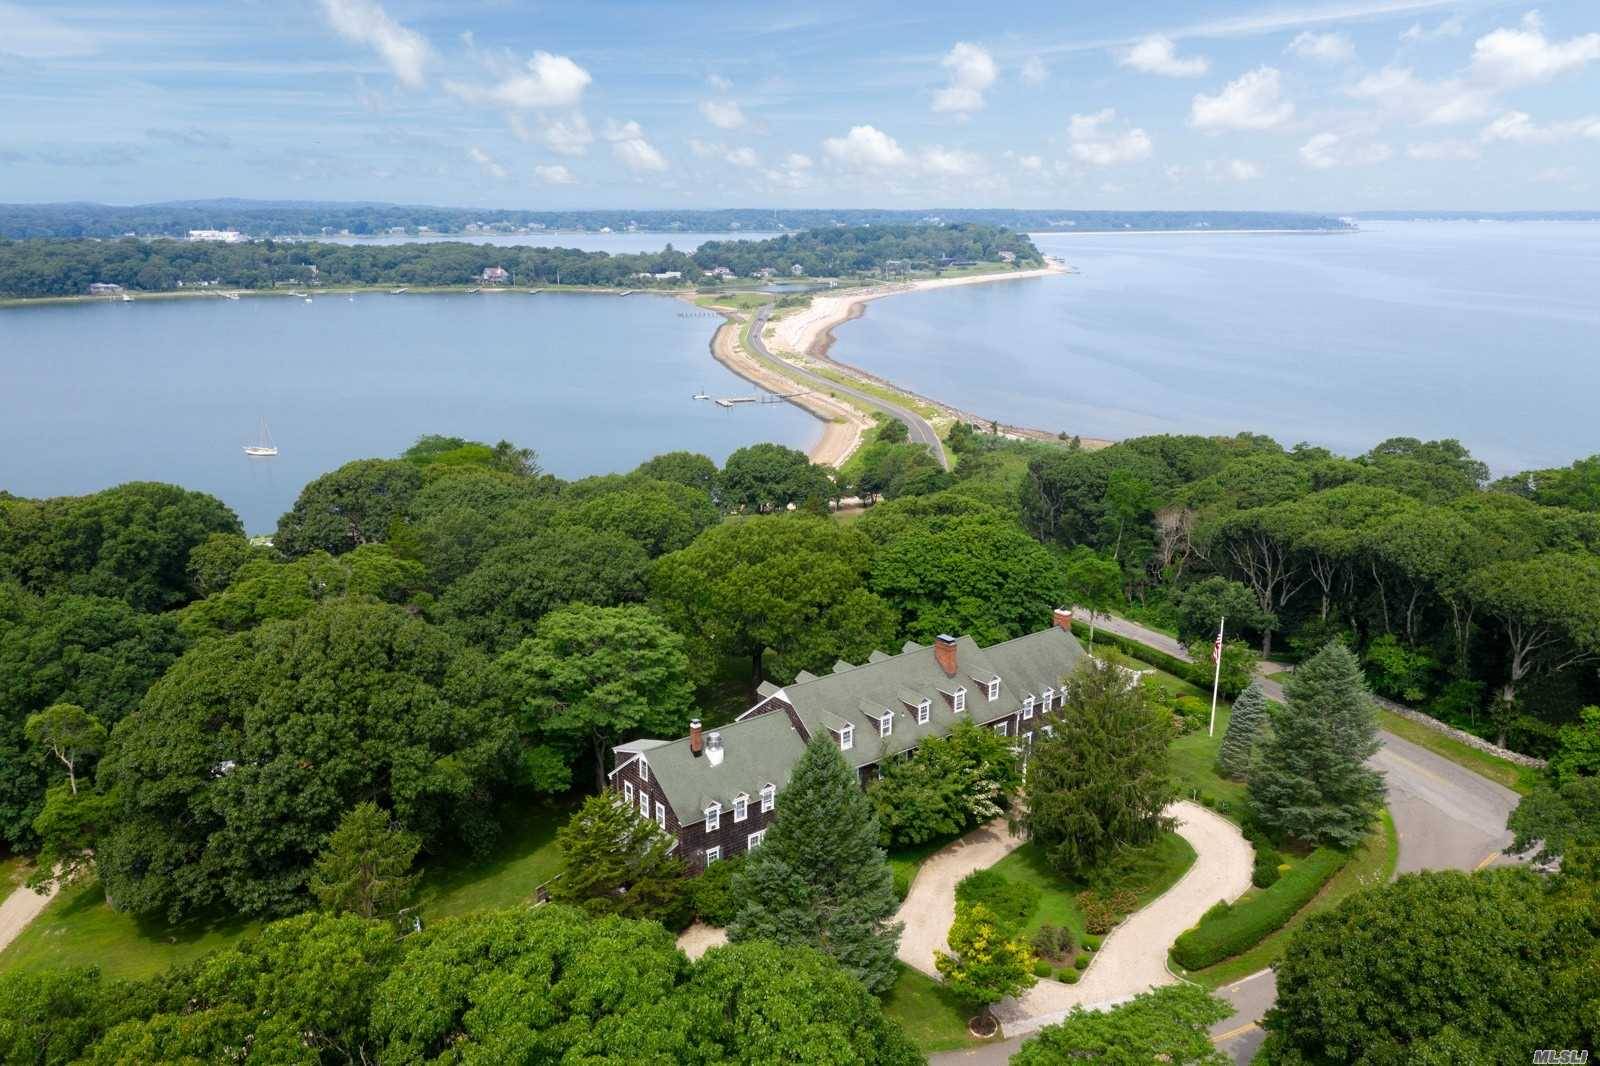 Own a piece of Shelter Island history with this one of a kind waterfront estate in the Hamptons.